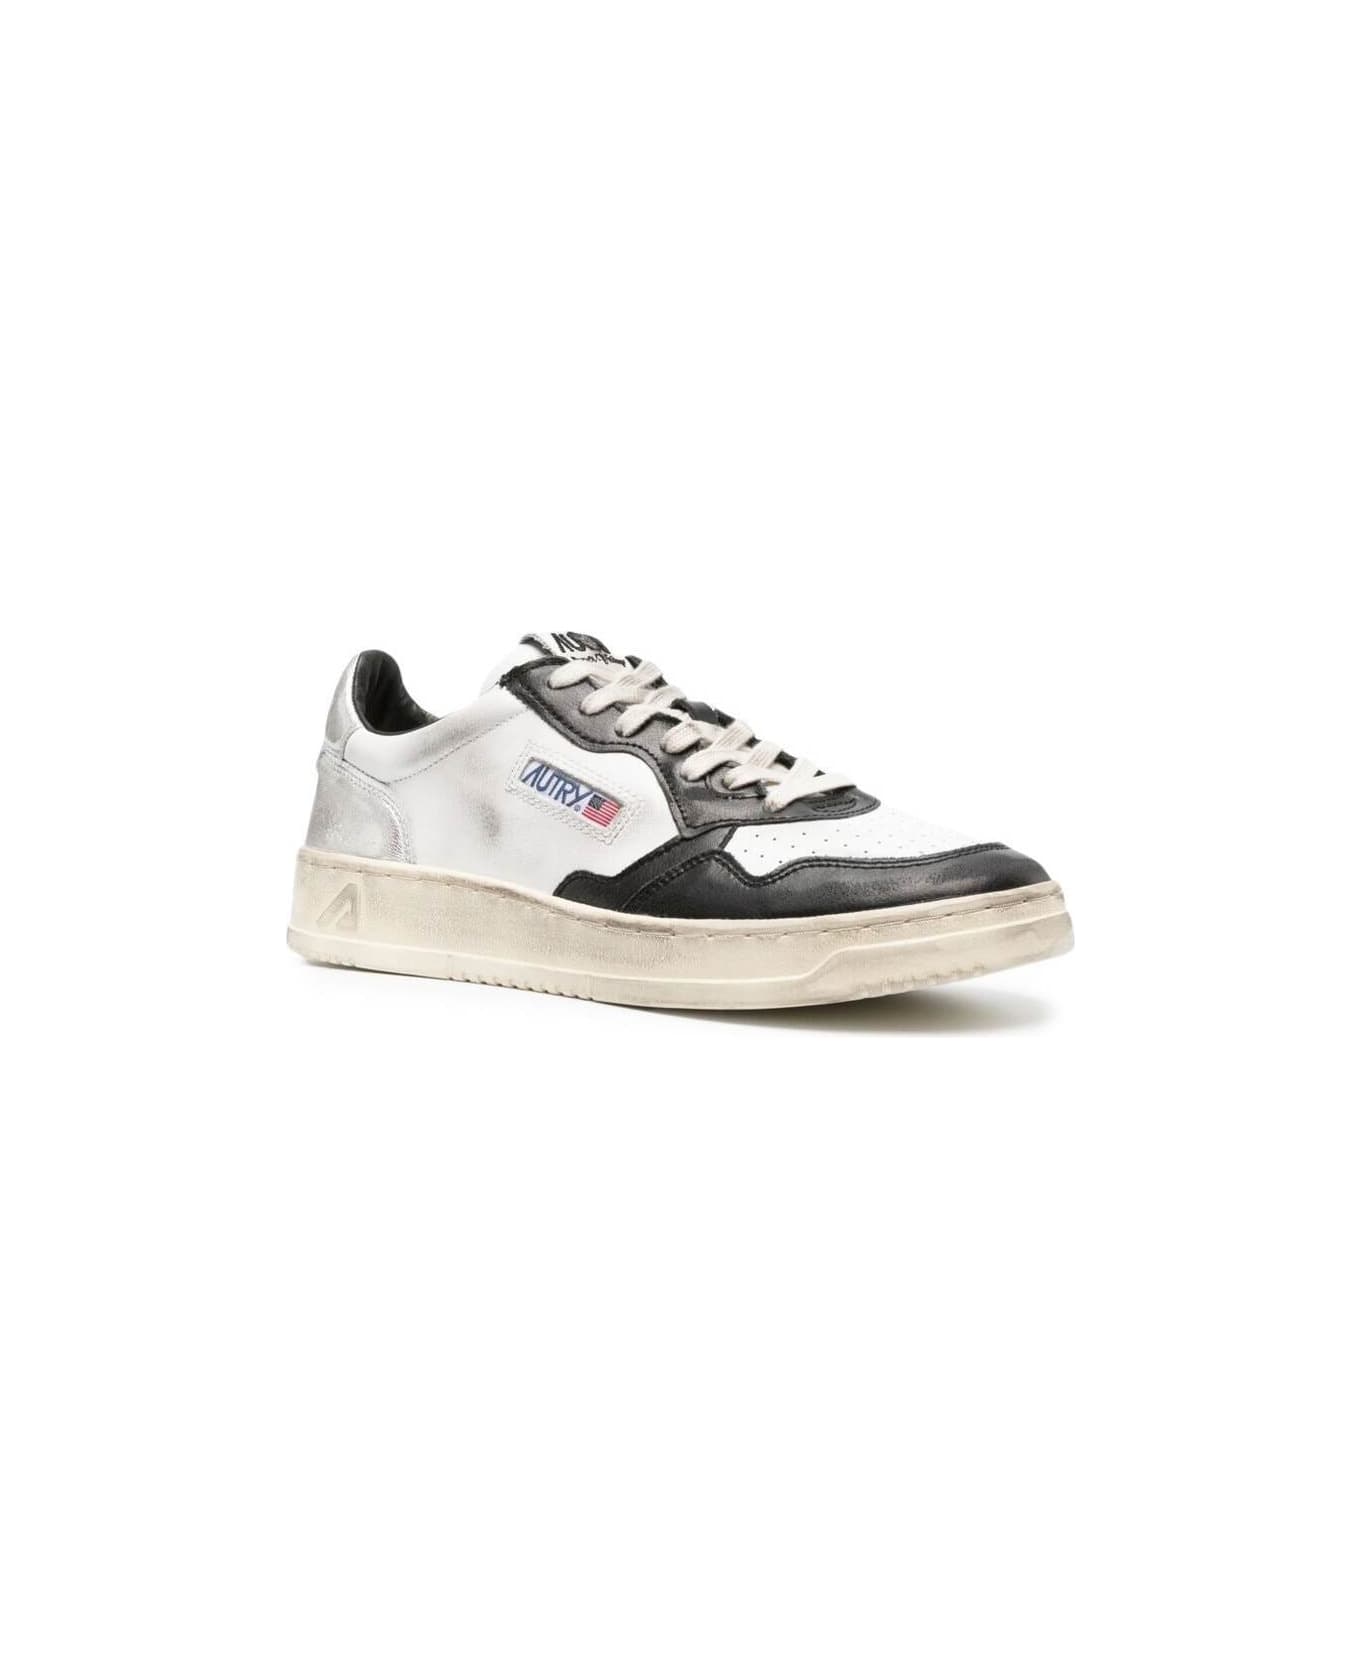 Autry Black And White 'medalist' Low Top Sneakers Distressed Finish In Cow Leather - Multicolor